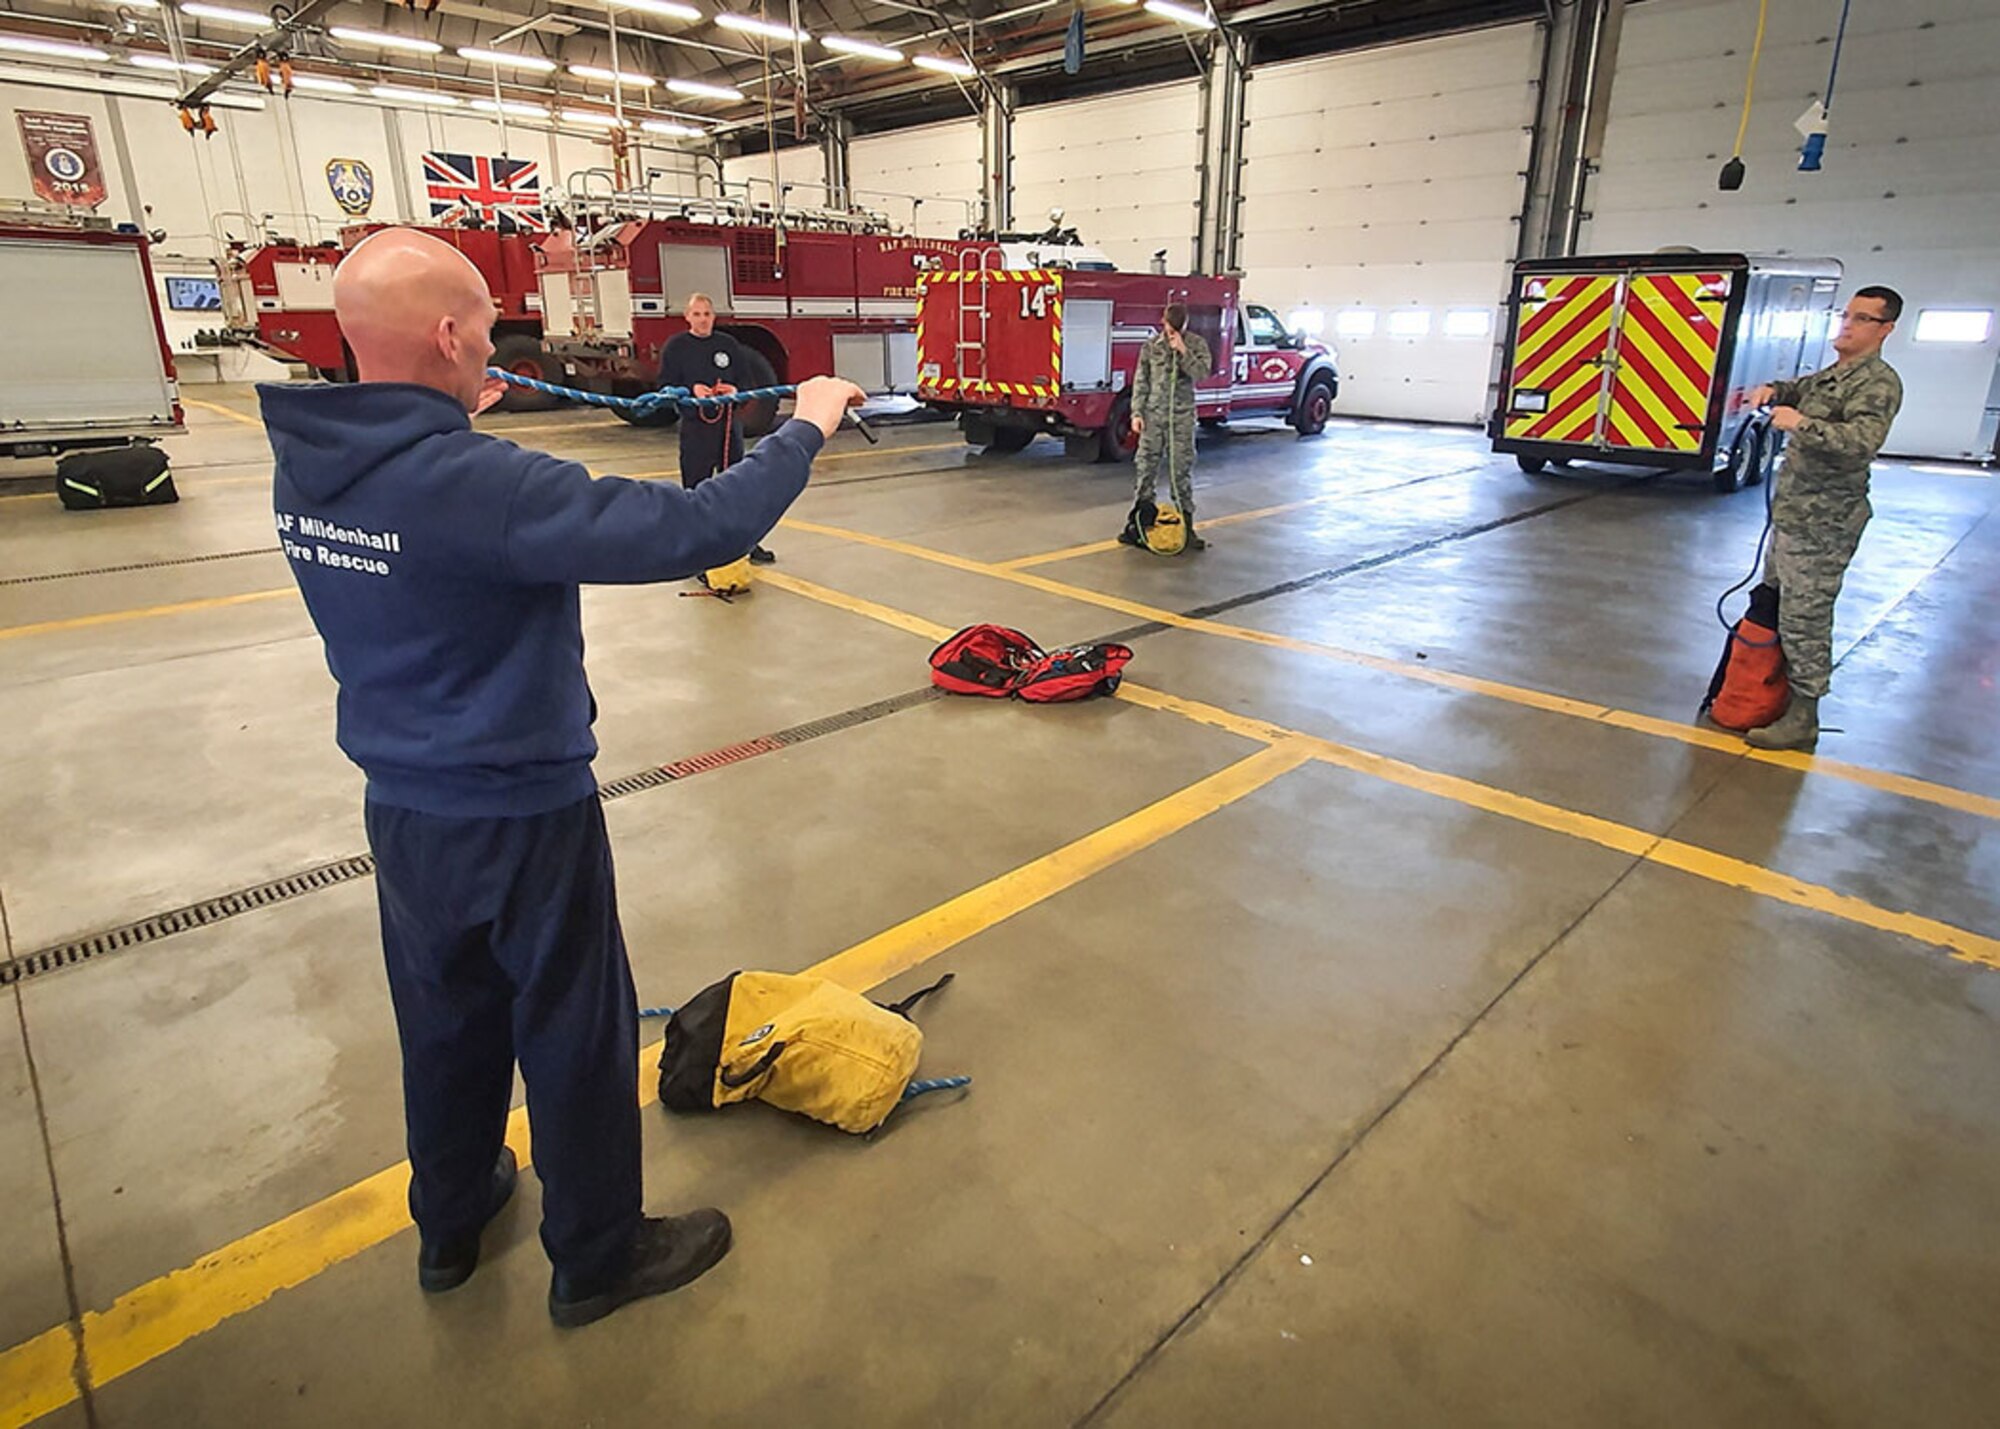 U.S. Air Force and civilian firefighters from the 100th Civil Engineer Squadron Fire Department carry out a rescue rope inspection while practicing physical distancing April 7, 2020, at RAF Mildenhall, England. During the COVID-19 lockdown, the firefighters are taking extra precautions both in and out of the fire station to ensure the health and safety of both themselves and the base community. (Courtesy photo by Matthew Thorpe)